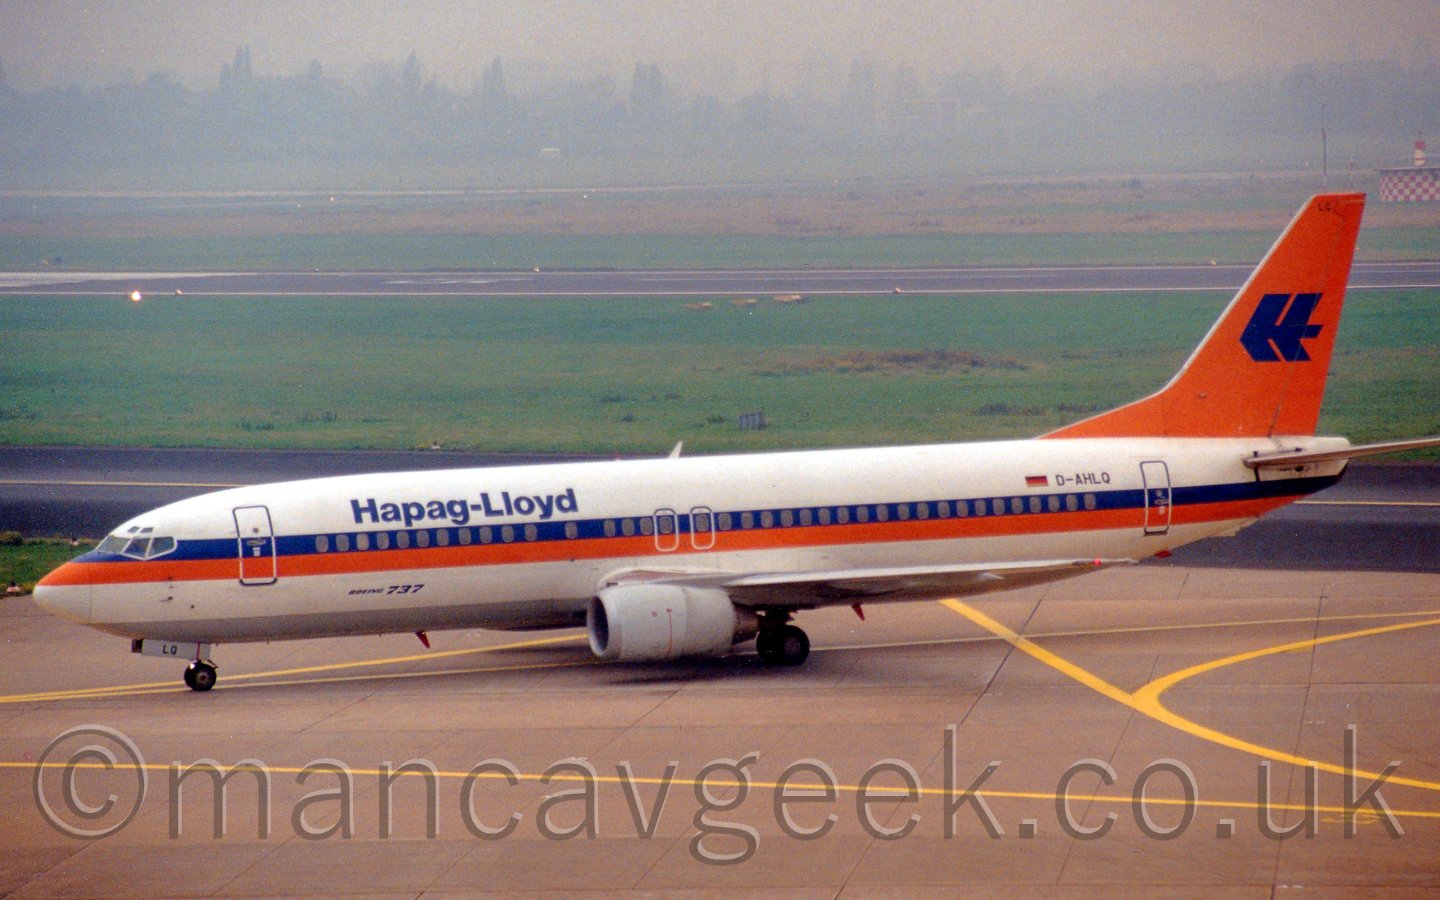 Side view of a white twin jet airliner with a blue and orange stripe running along the body with blue "Hapag-Lloyd" titles on the upper forward fuselage, and an orange tail with a stylised letter "H", taxiing from right to left, with large areas of grass and taxiways in the background vanishing in to mist.